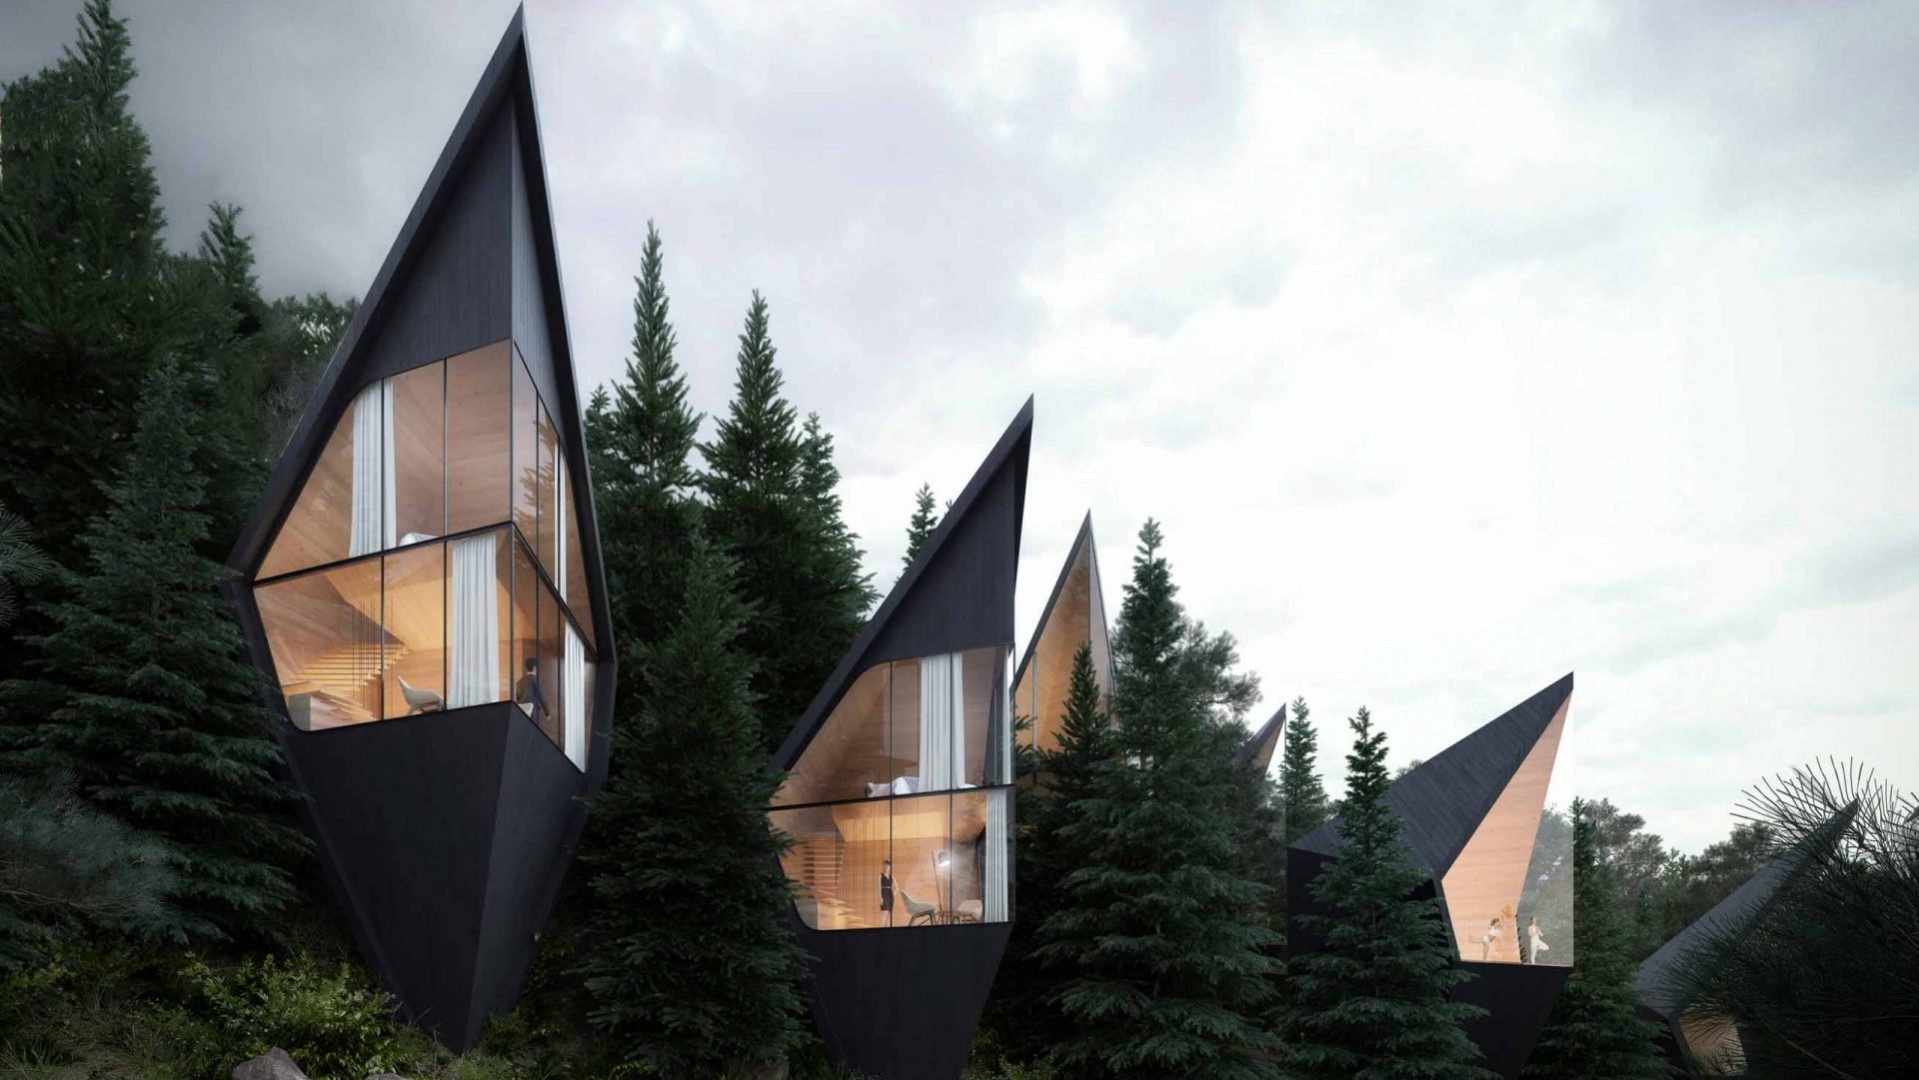 Peter_Pichler_Architecture_Tree_Houses_1